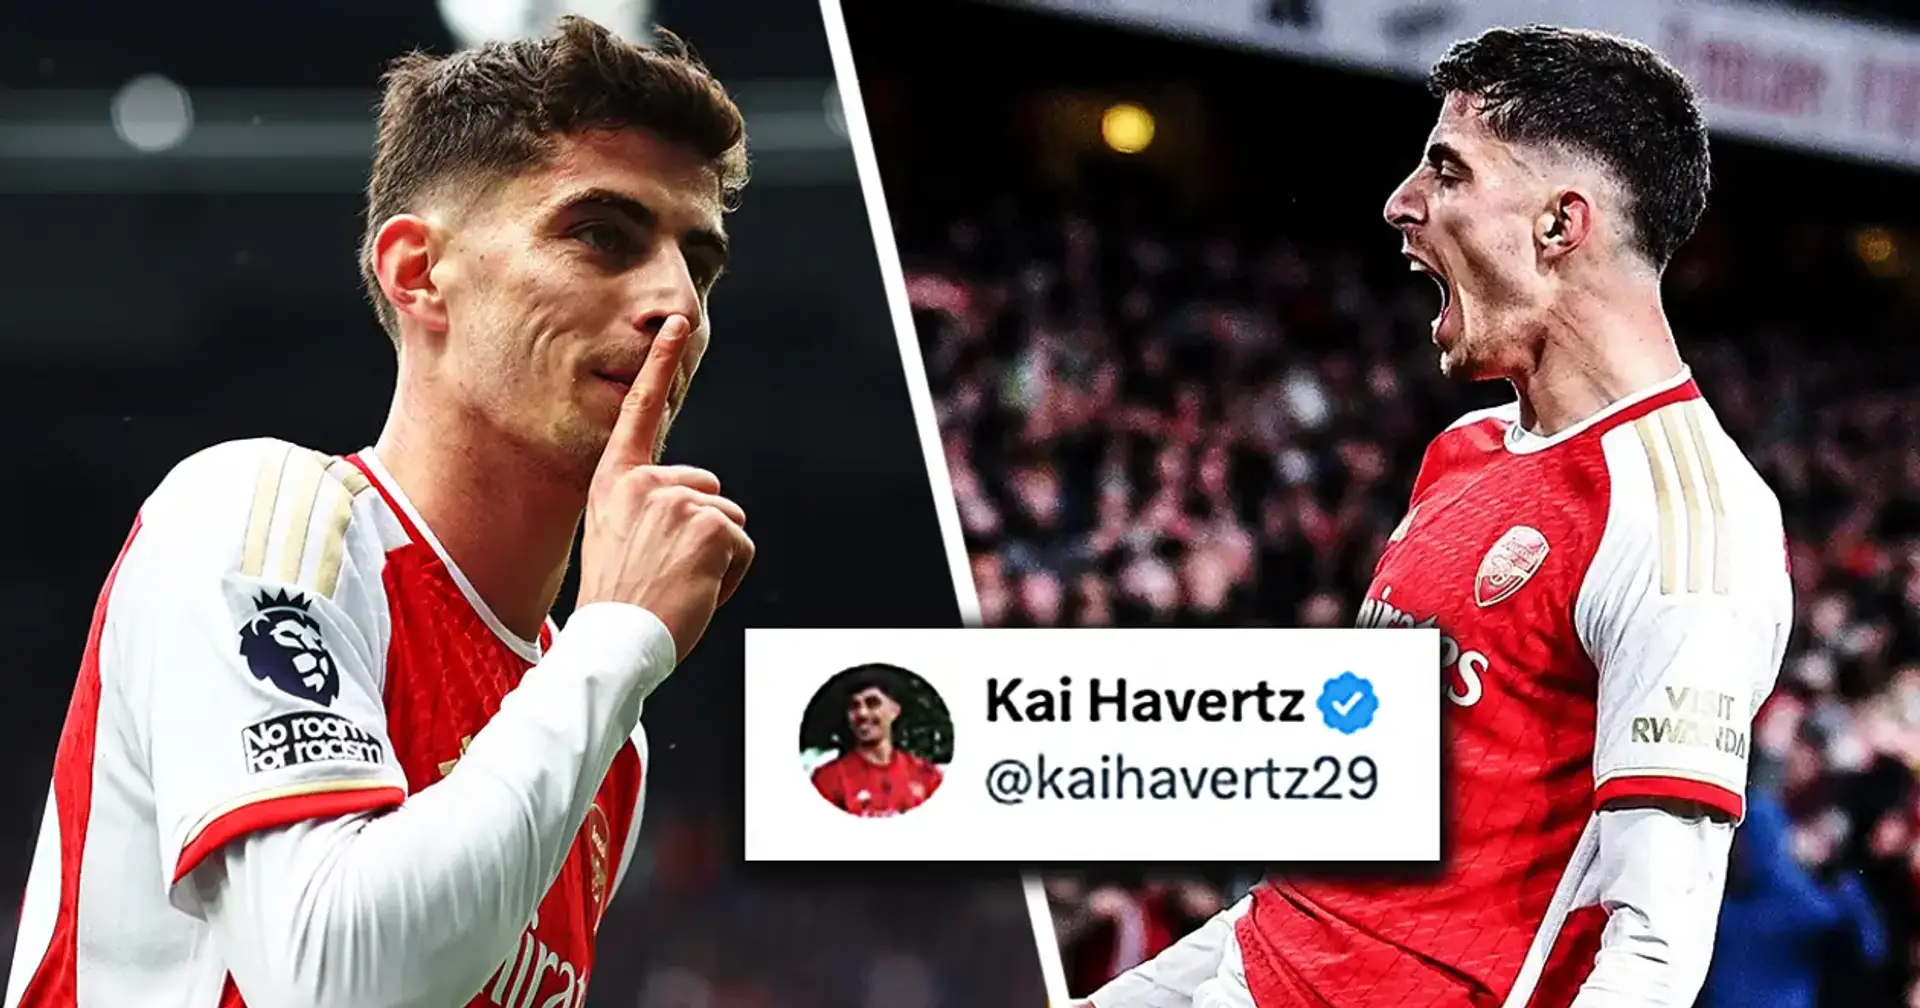 Kai Havertz blew up Twitter with one video - he posted it right after the win over Tottenham